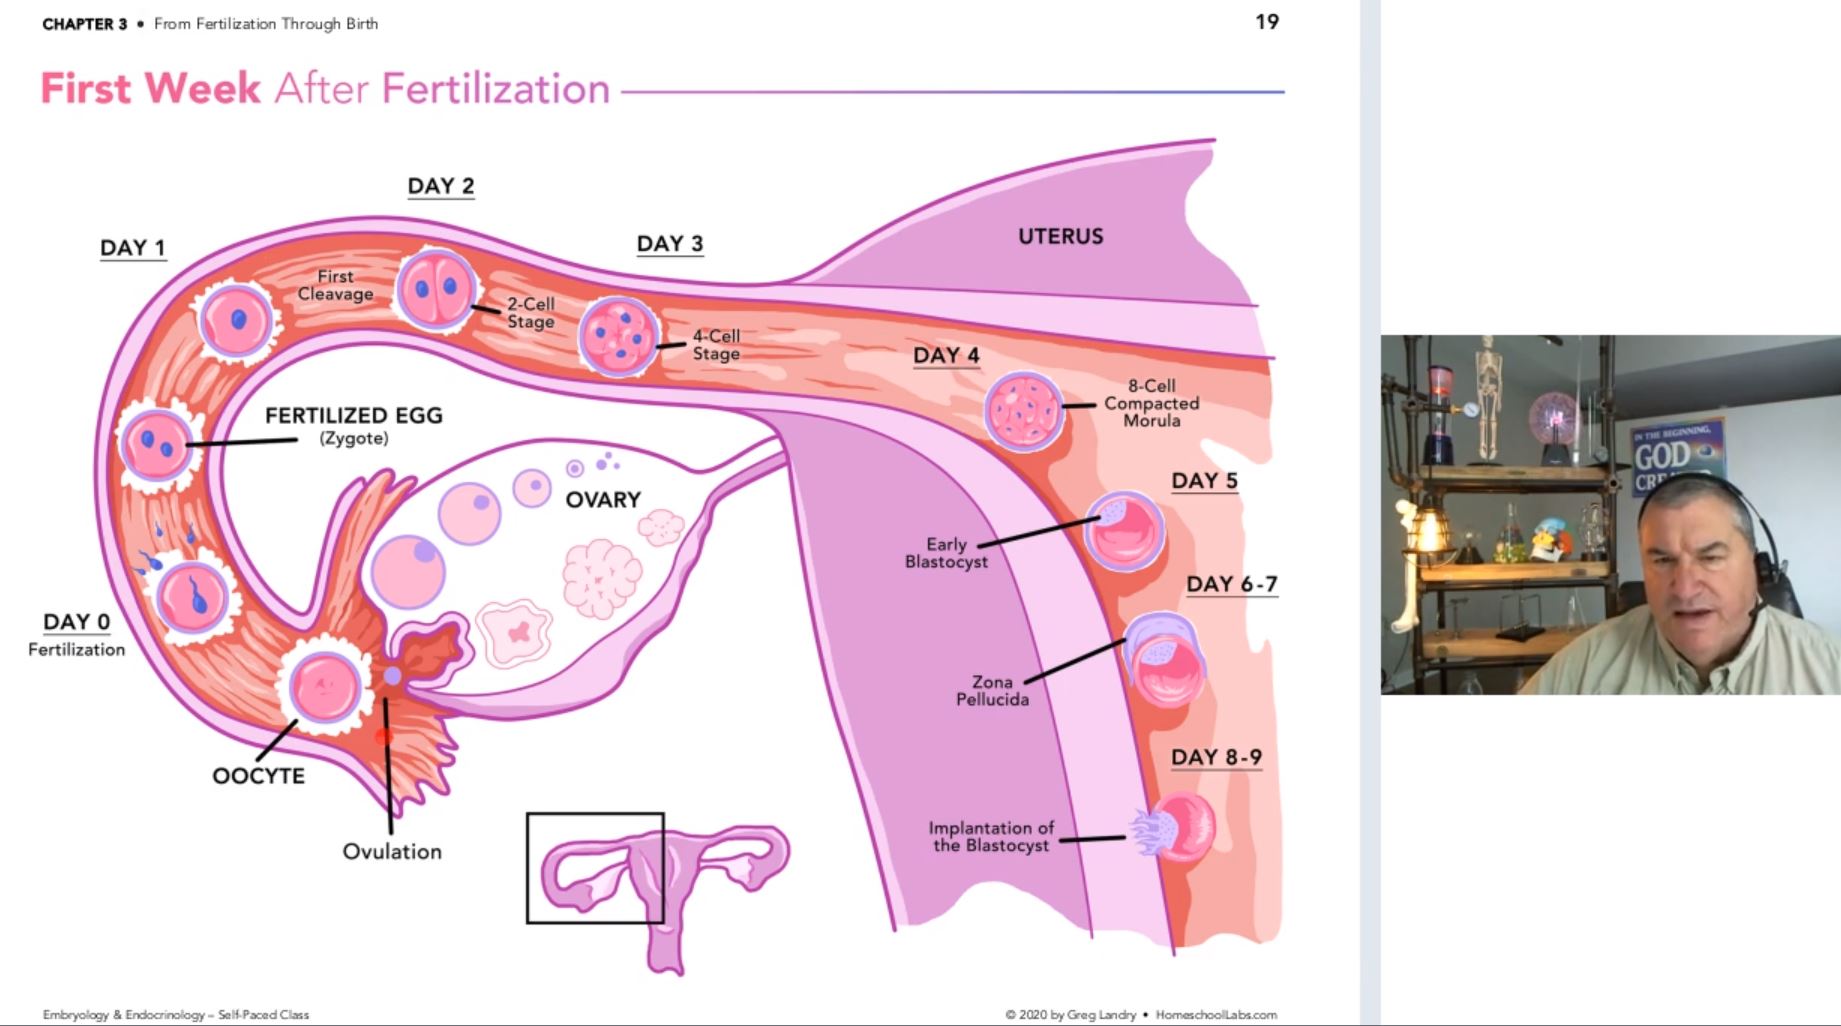 Embryology and Endocrinology Inside Course Screenshot